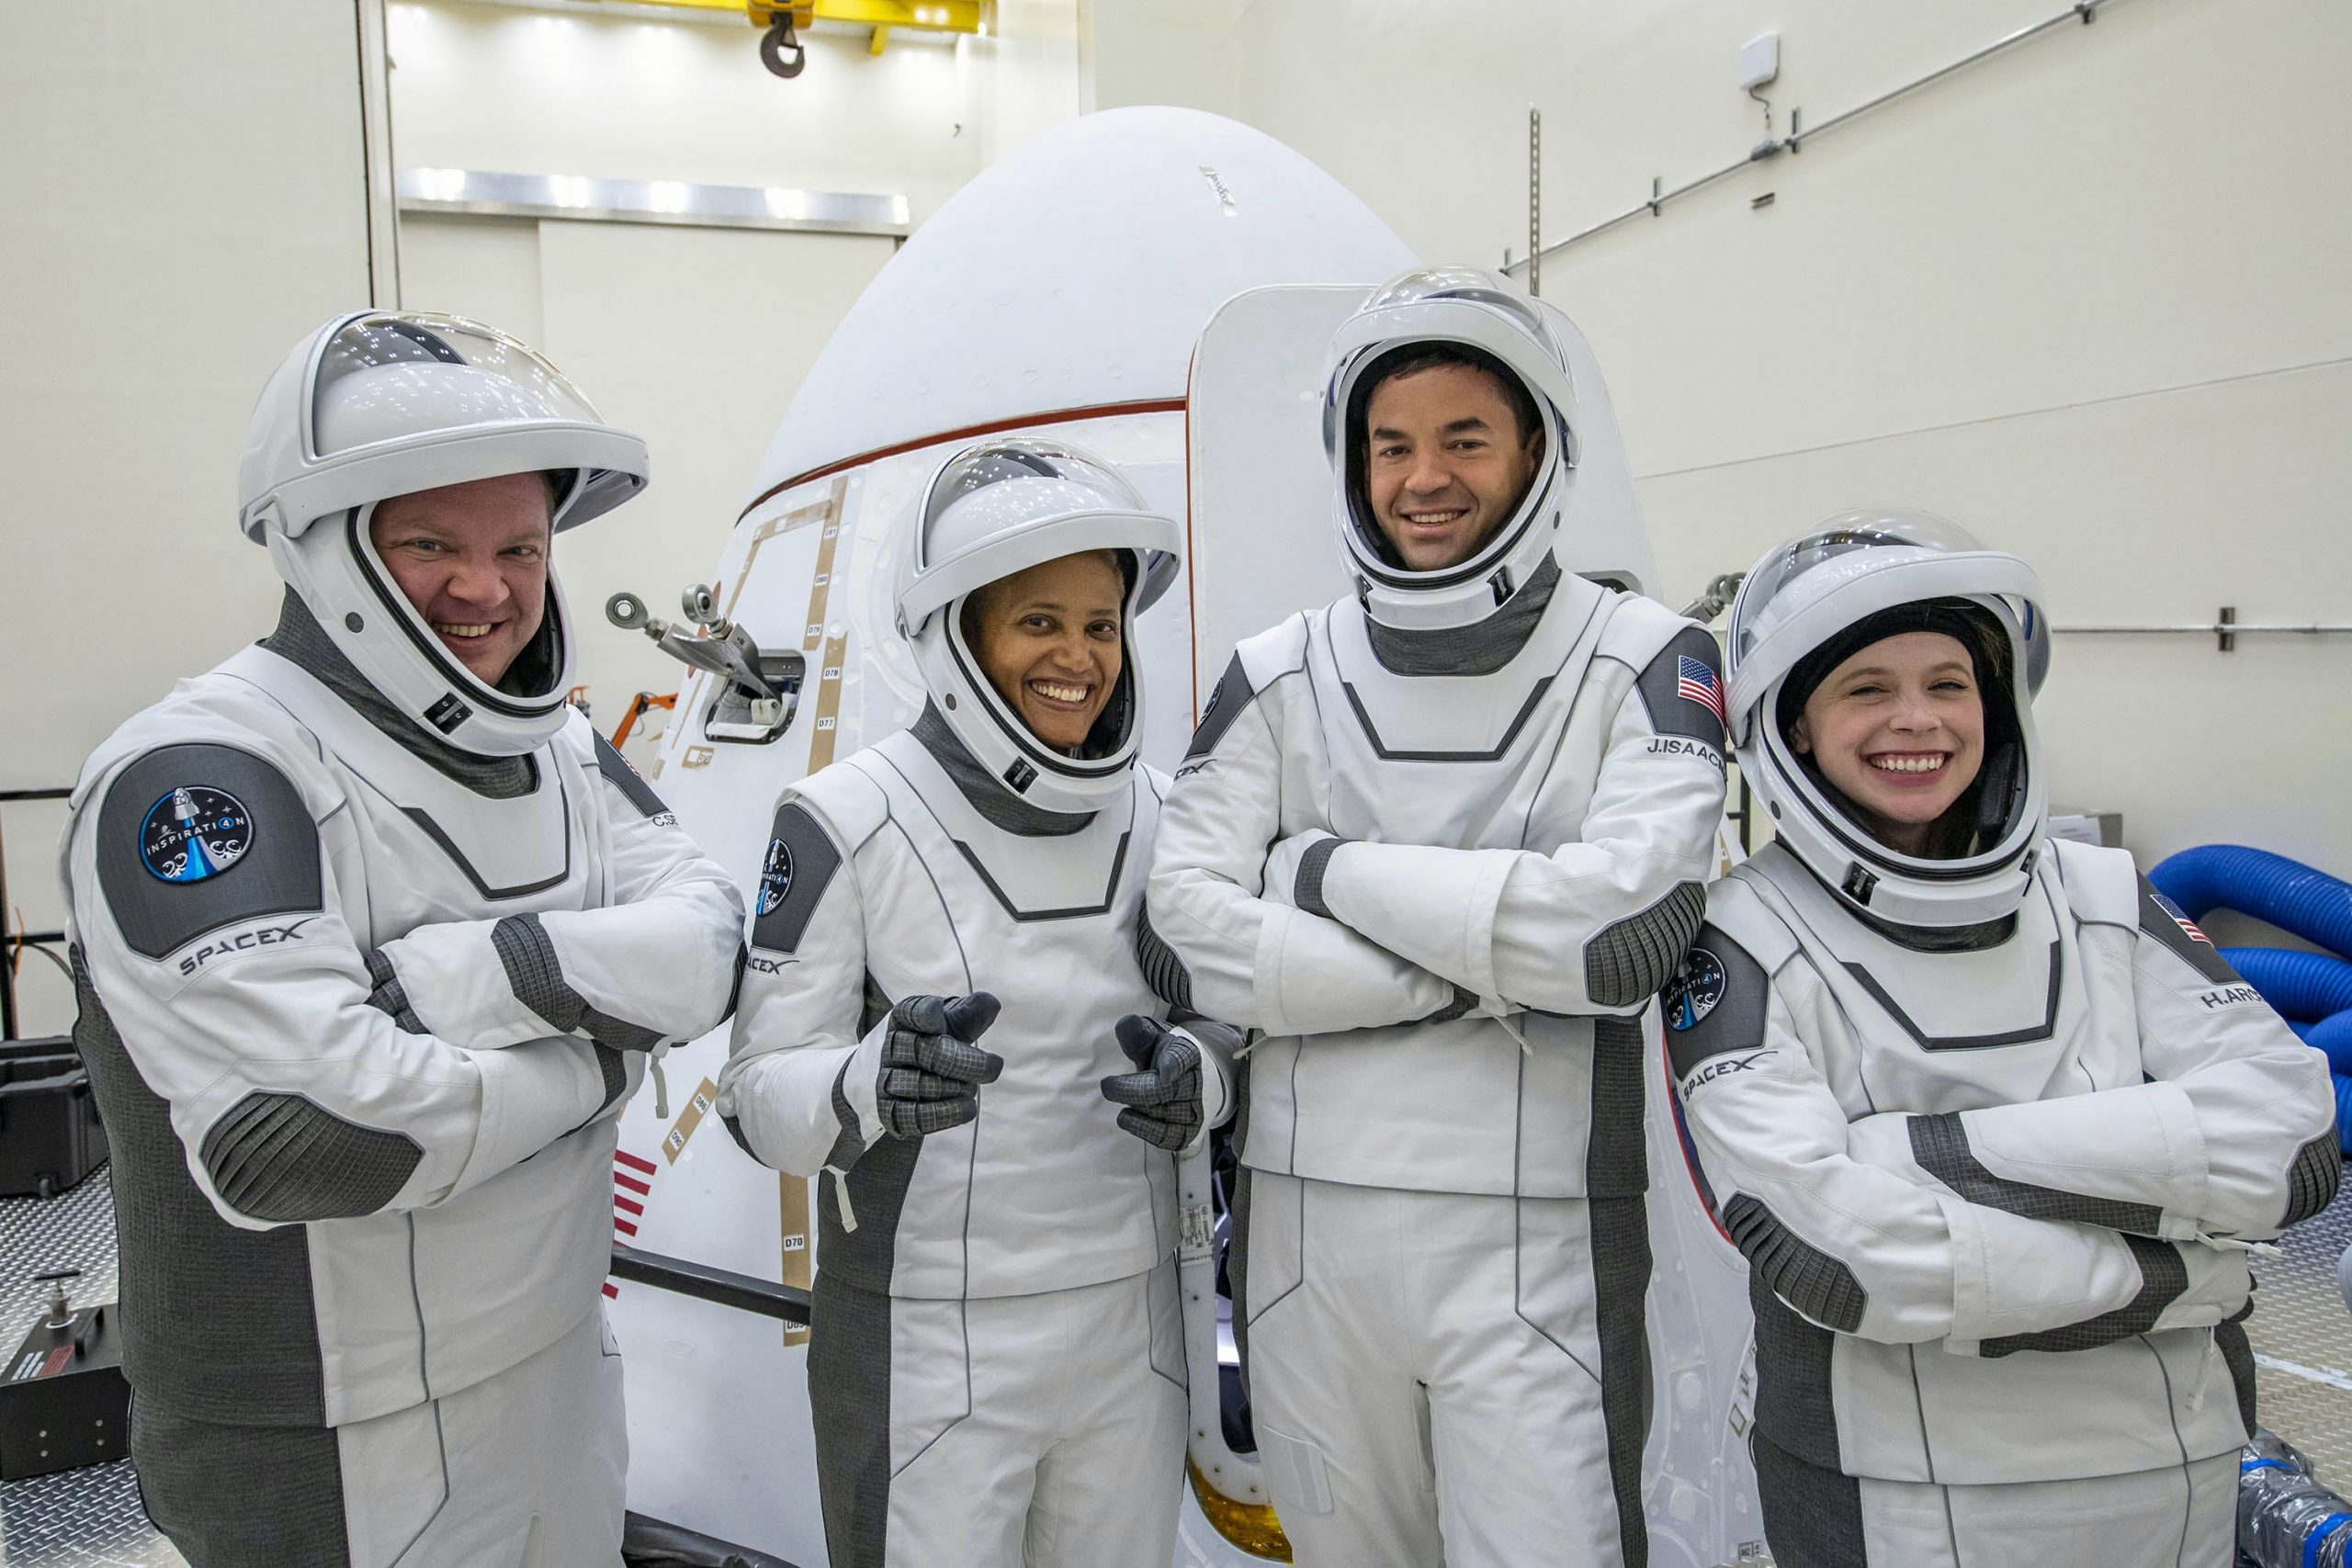 inspiration4 crew members pose in white grey spacex spacesuits in front of crew dragon spaceship